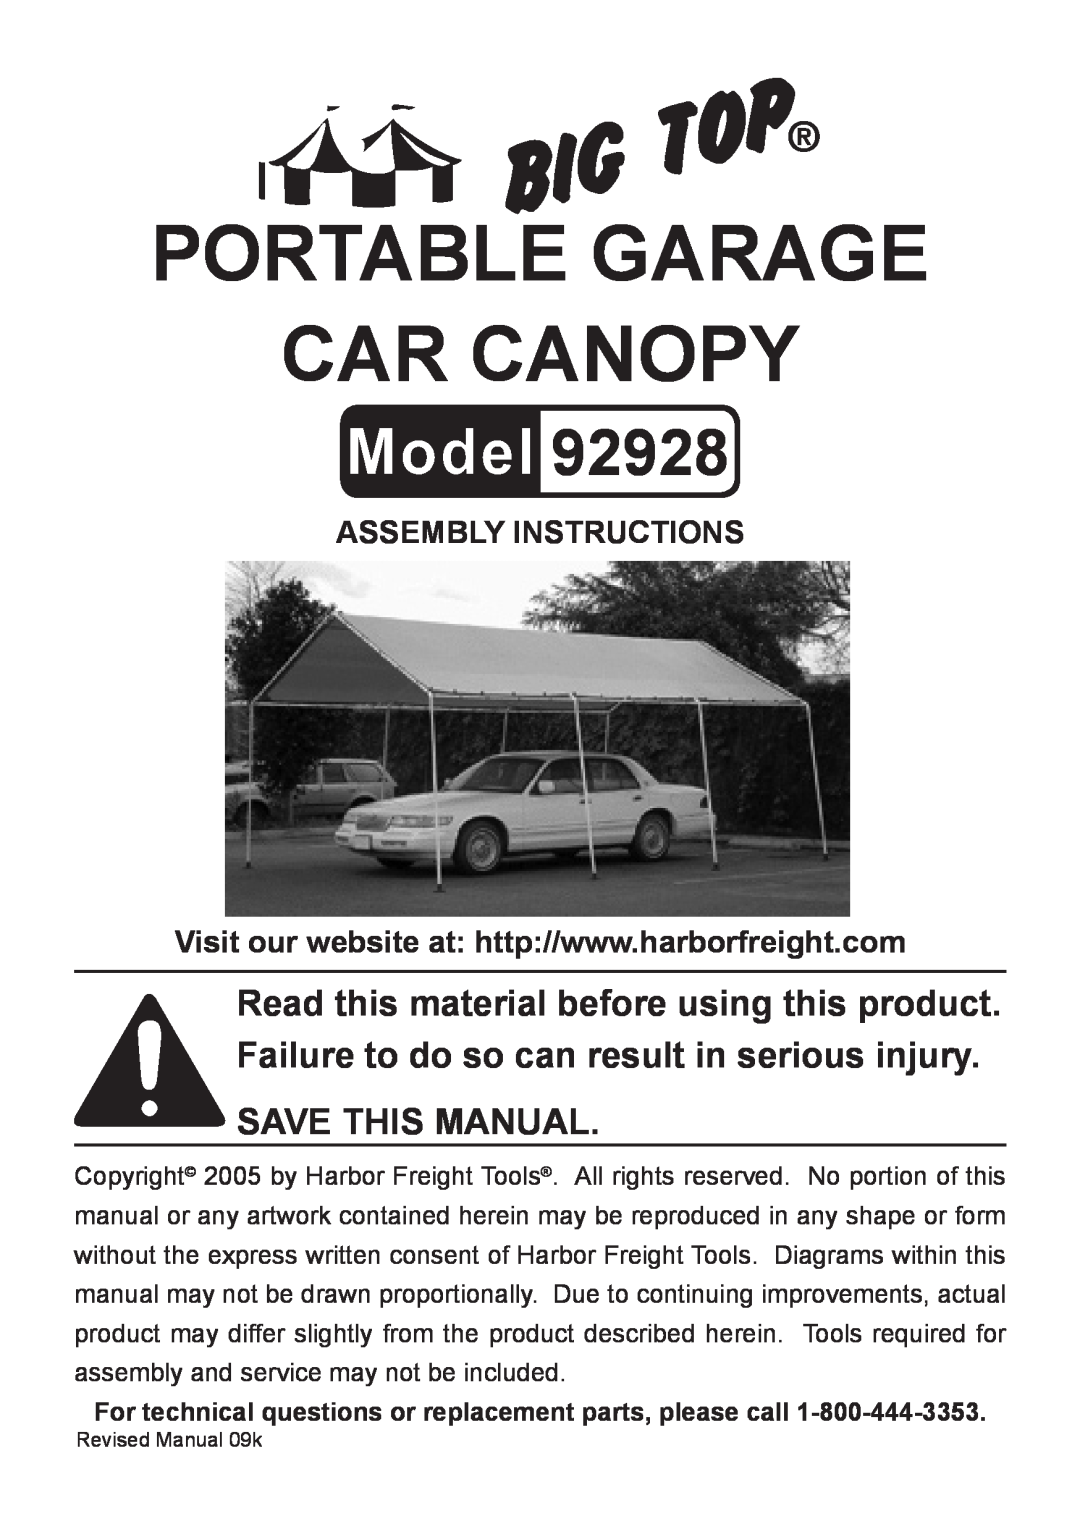 Harbor Freight Tools 92928 manual Assembly Instructions, Portable Garage Car Canopy, Save this manual 